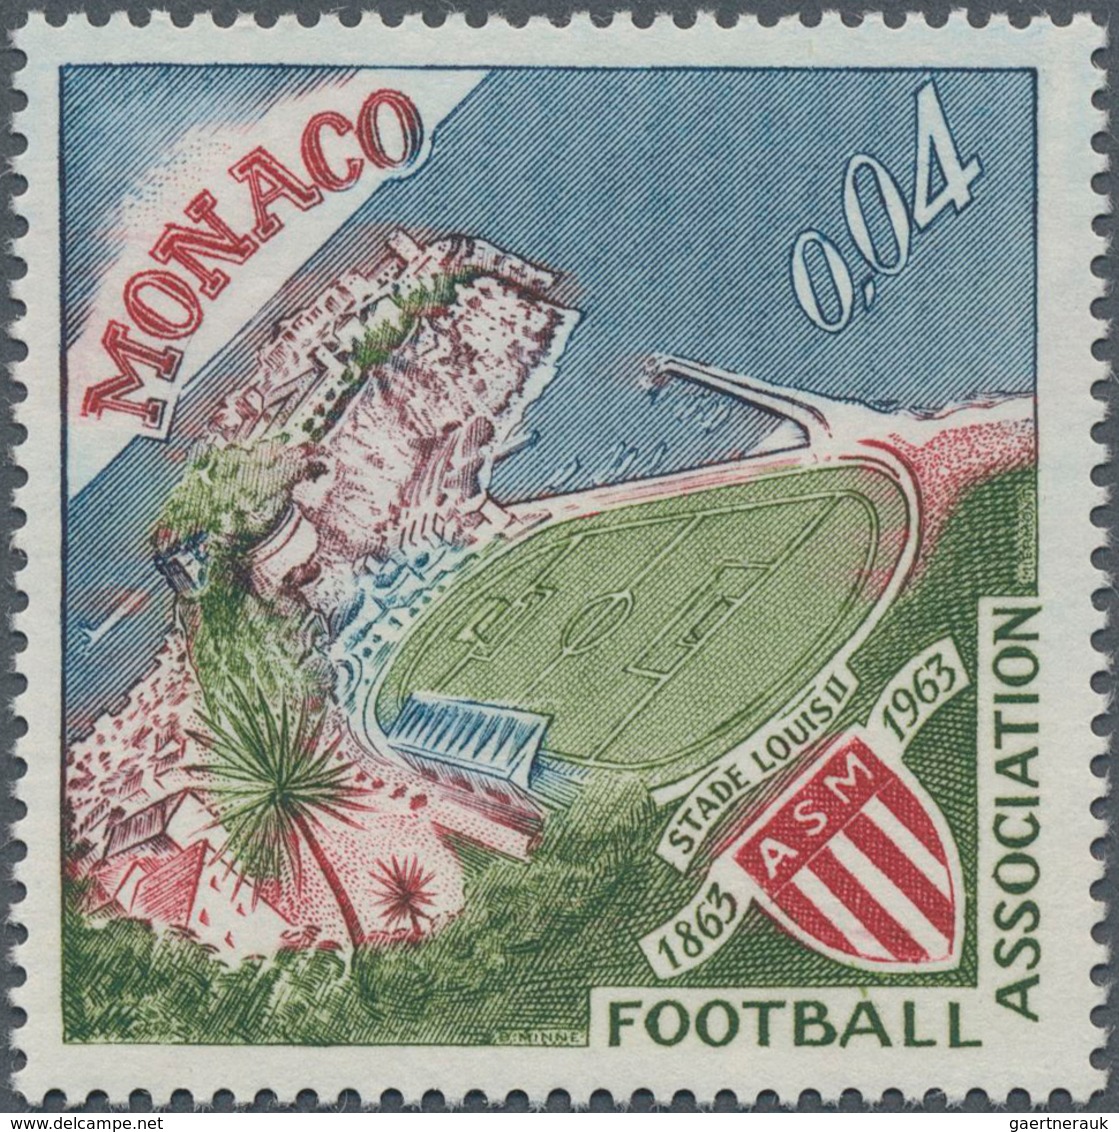 Monaco: 1963, French Champion "AS Monaco", 0.04fr. Without Surcharge, Not Issued, Unmounted Mint, Si - Oblitérés